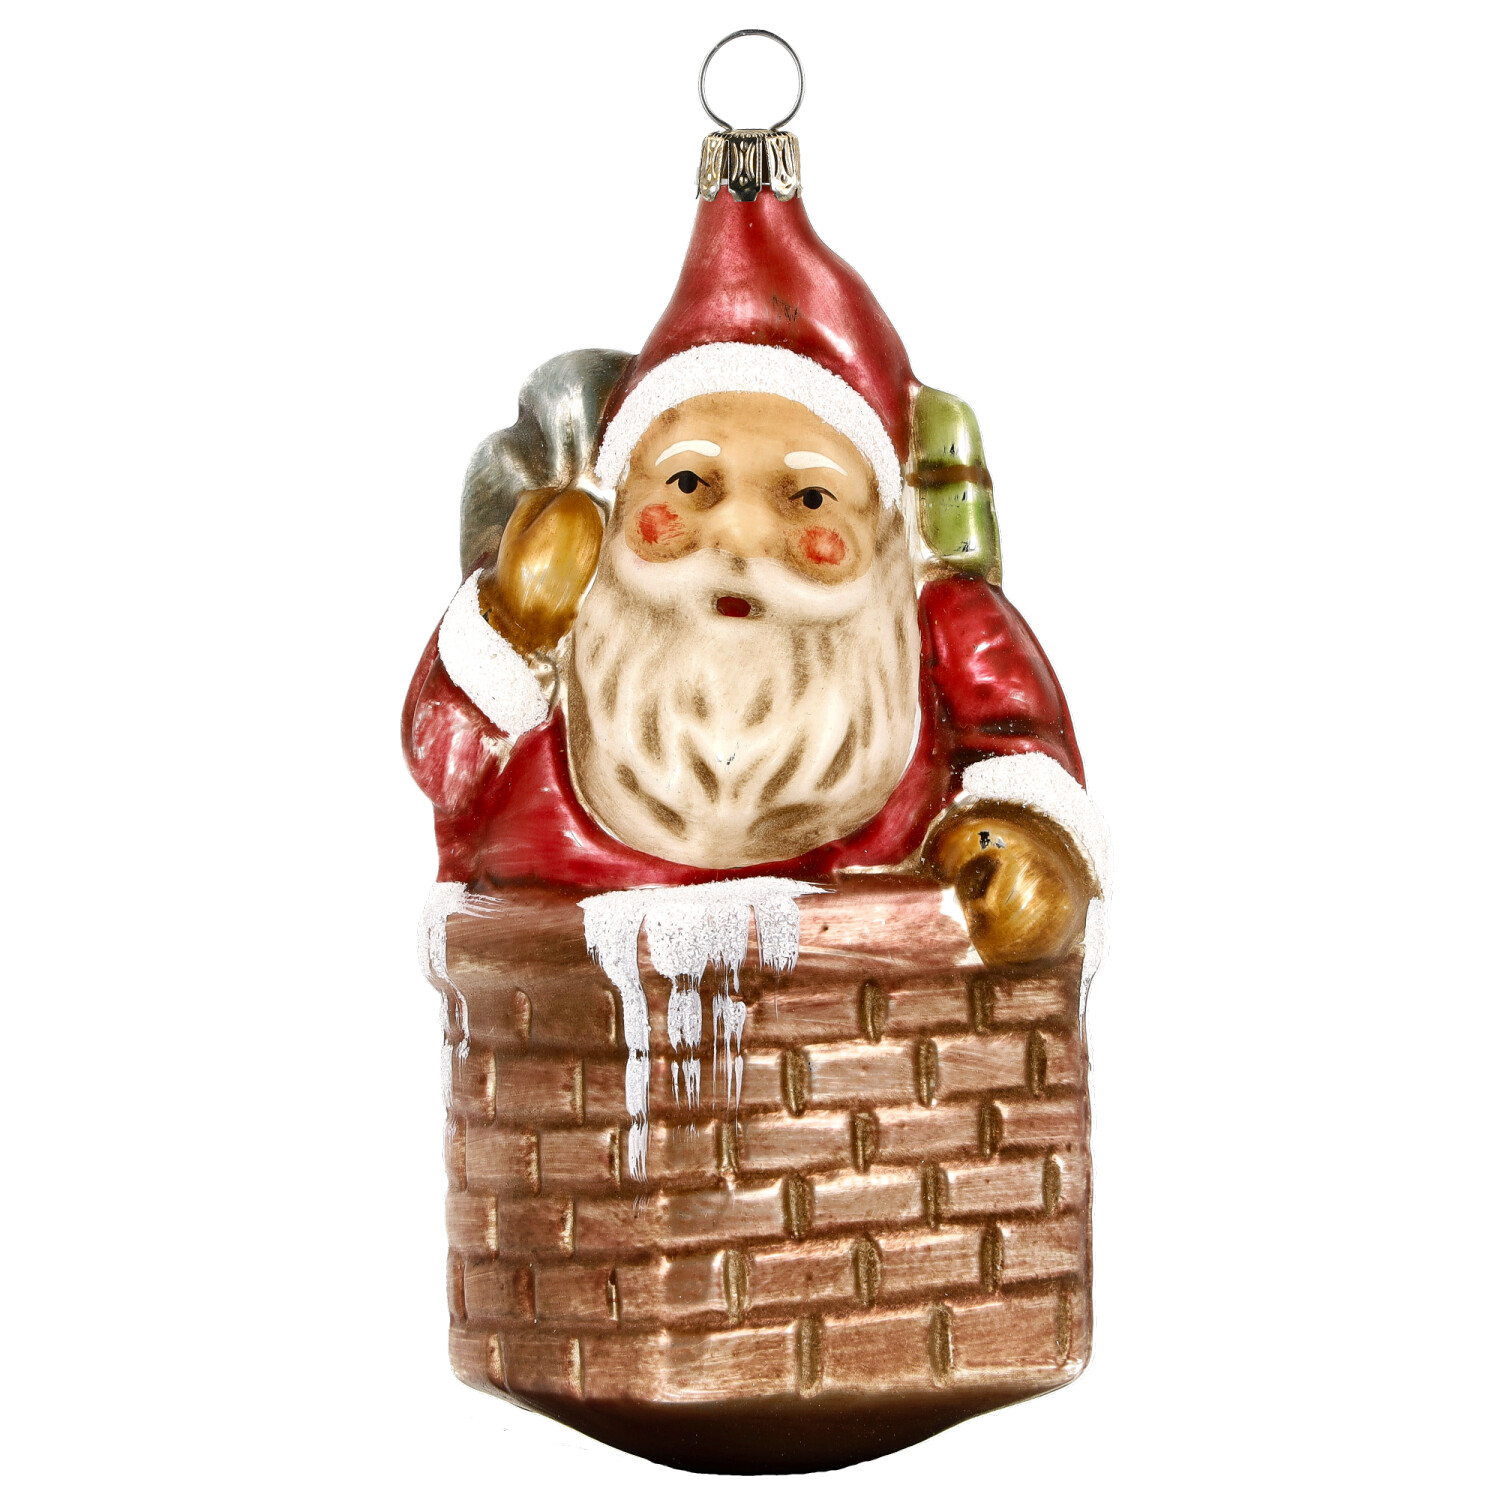 Retro Vintage style Christmas Glass Ornament - Santa with sack in chimney